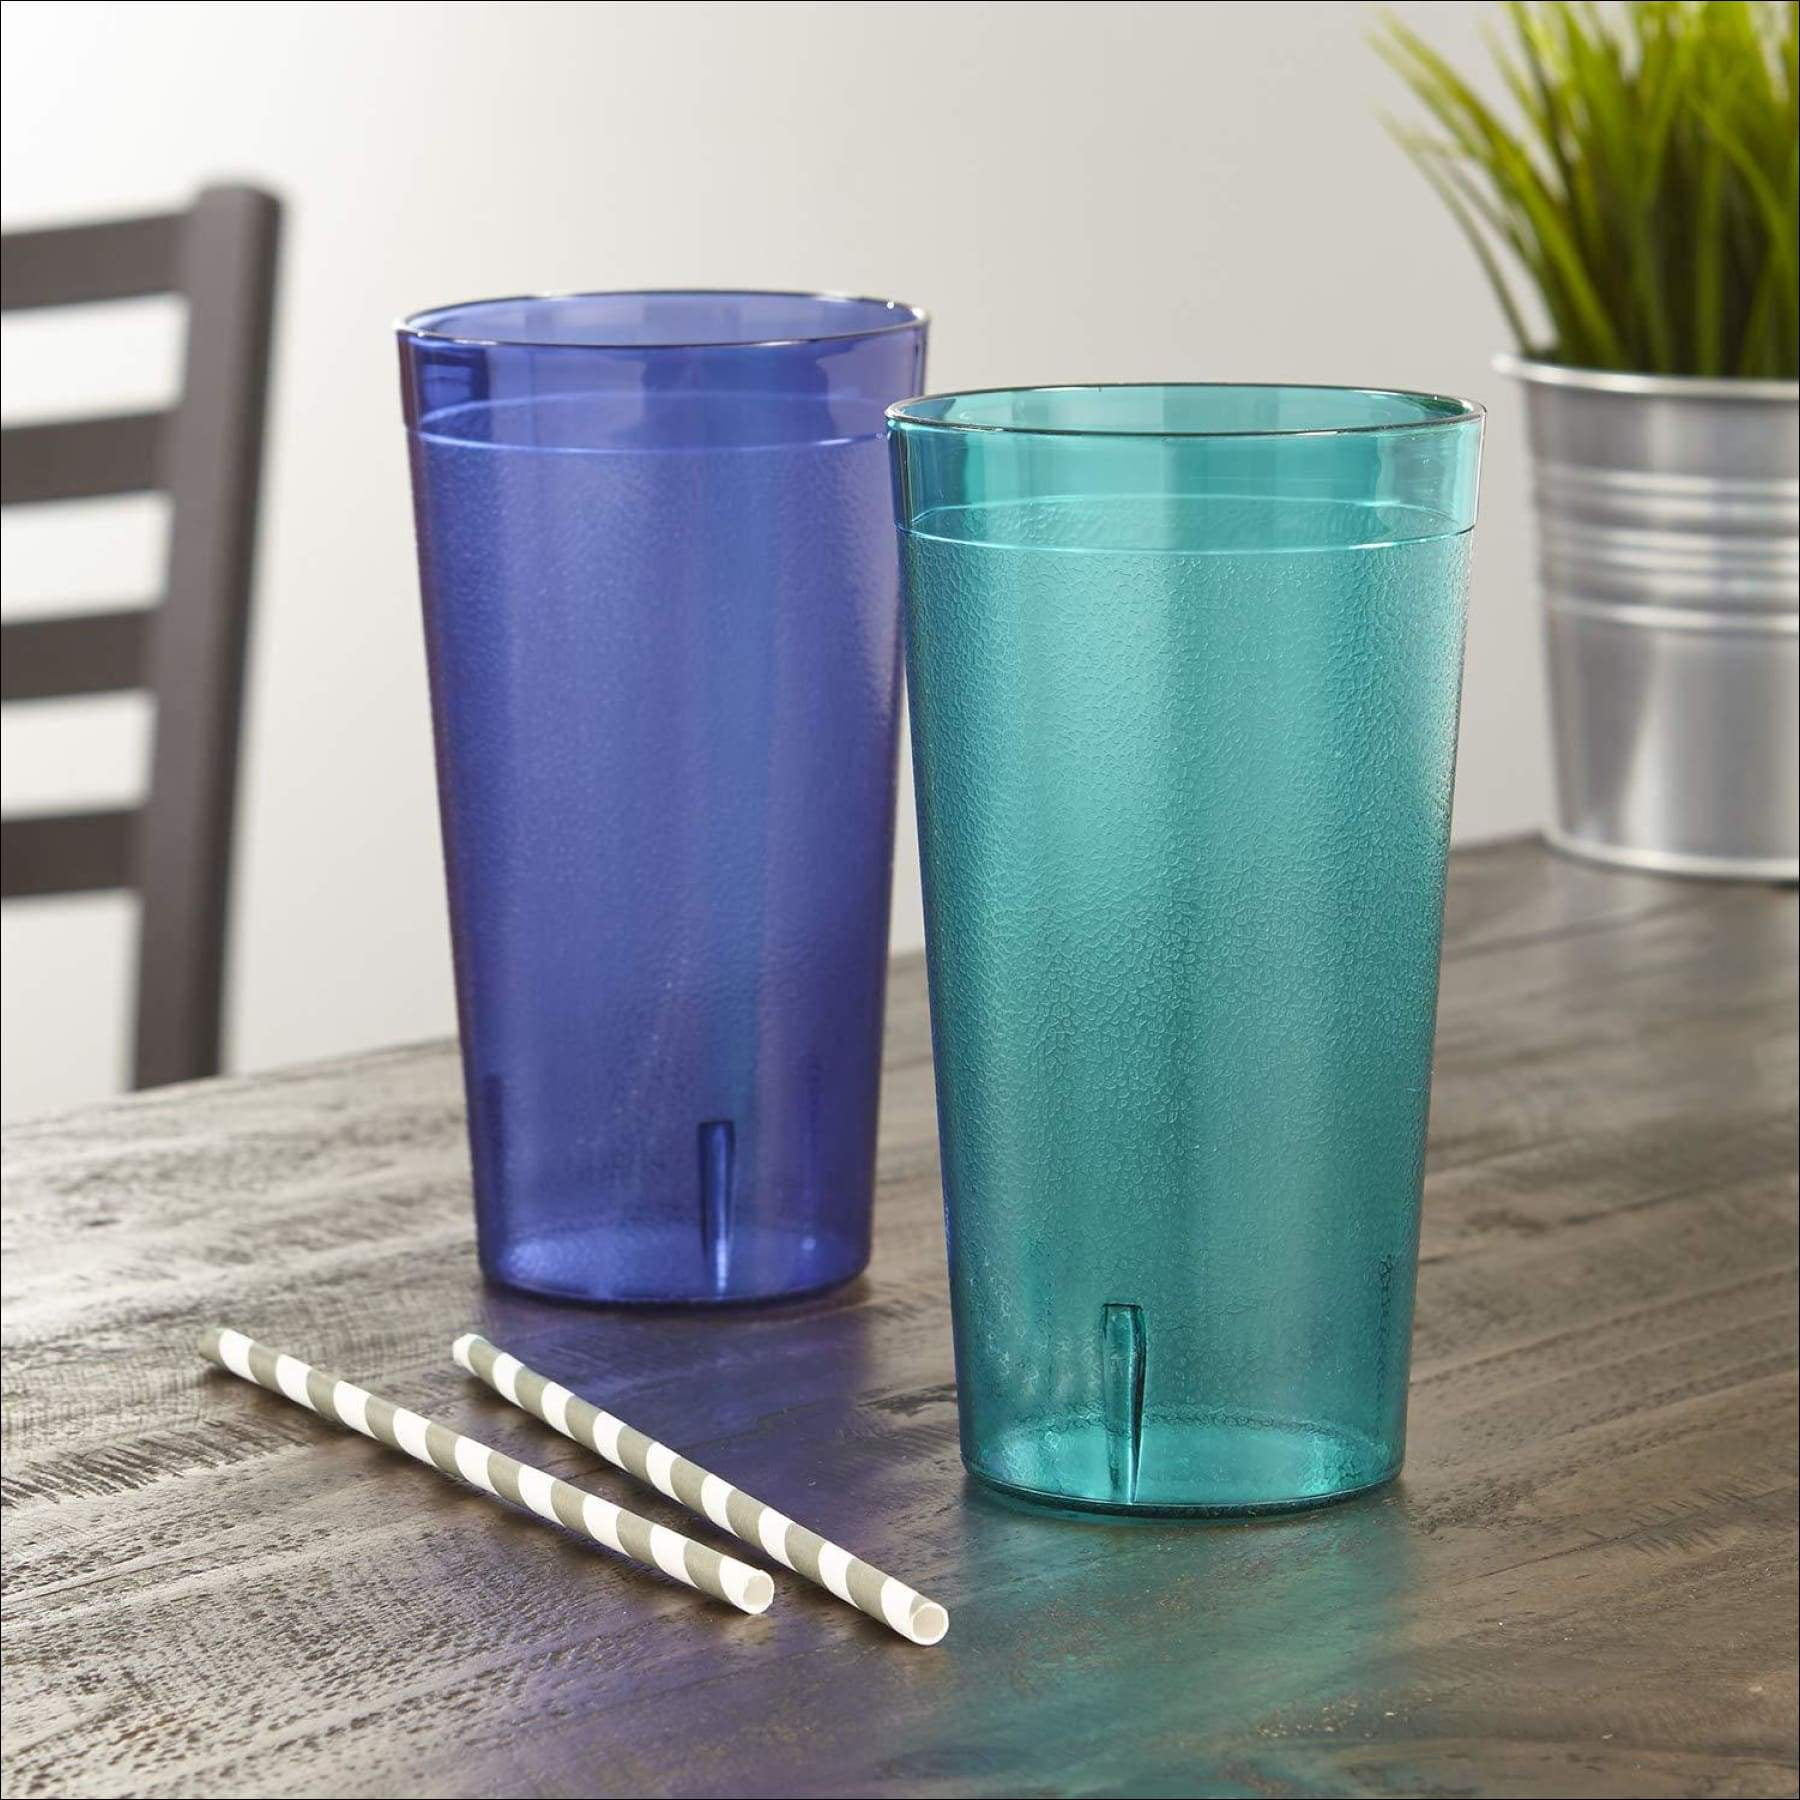 US Acrylic Cafe Plastic Reusable Tumblers (Set of 16) 20-ounce